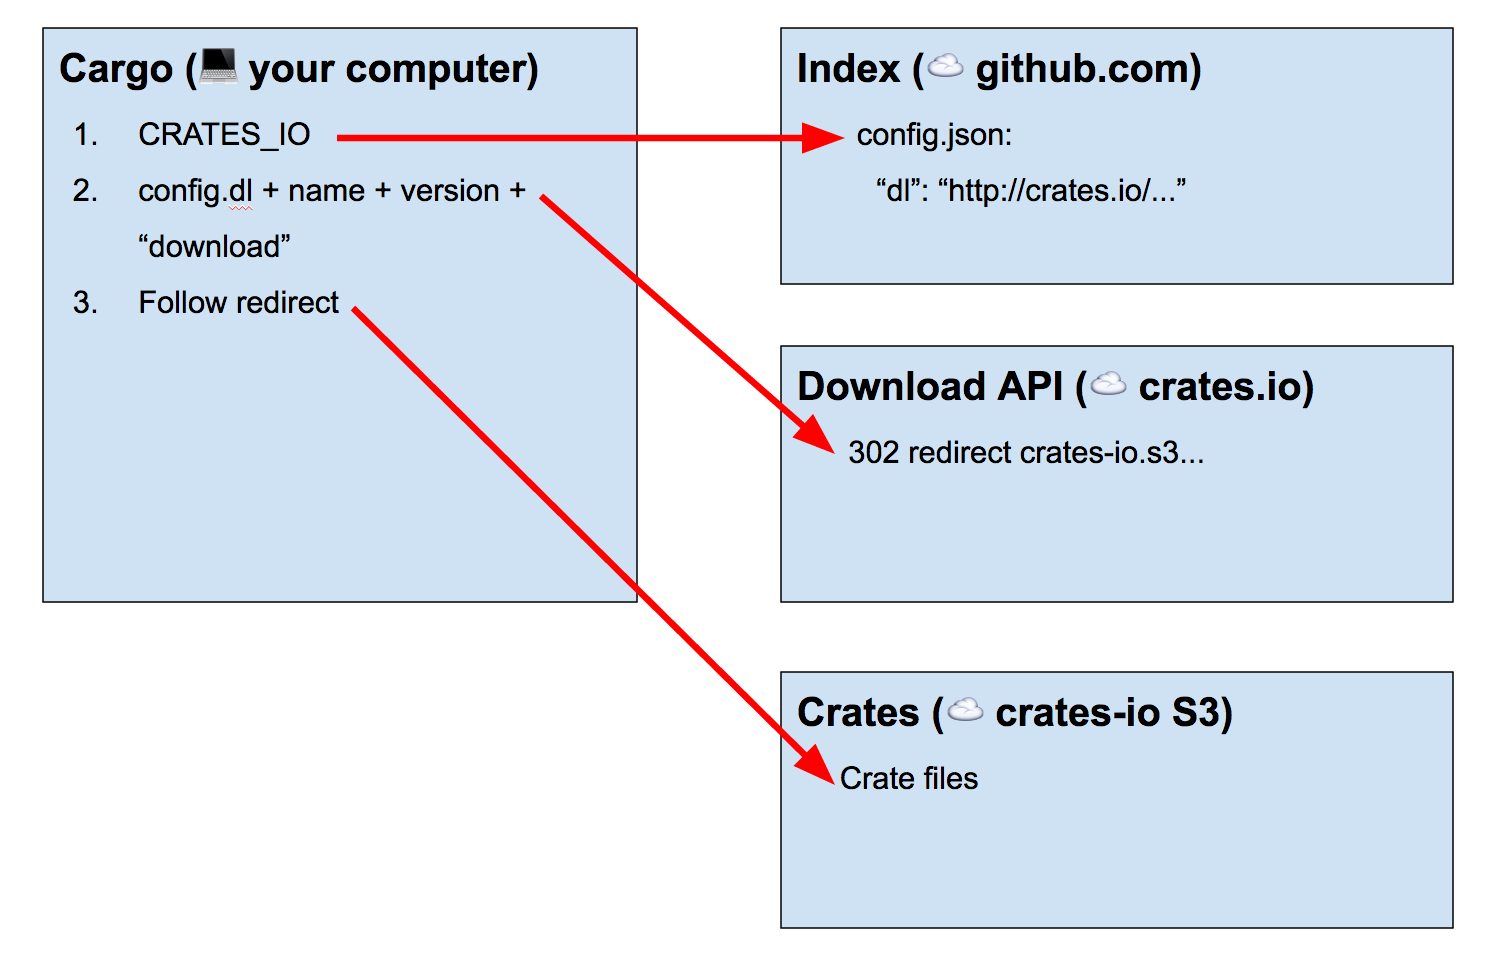 Diagram showing Cargo on your computer using the CRATES_IO to know where the index is on github.com, then using the value in the index's config.json file for dl to create URLs that go to crates.io, then following the redirect to cratesio's S3 bucket.